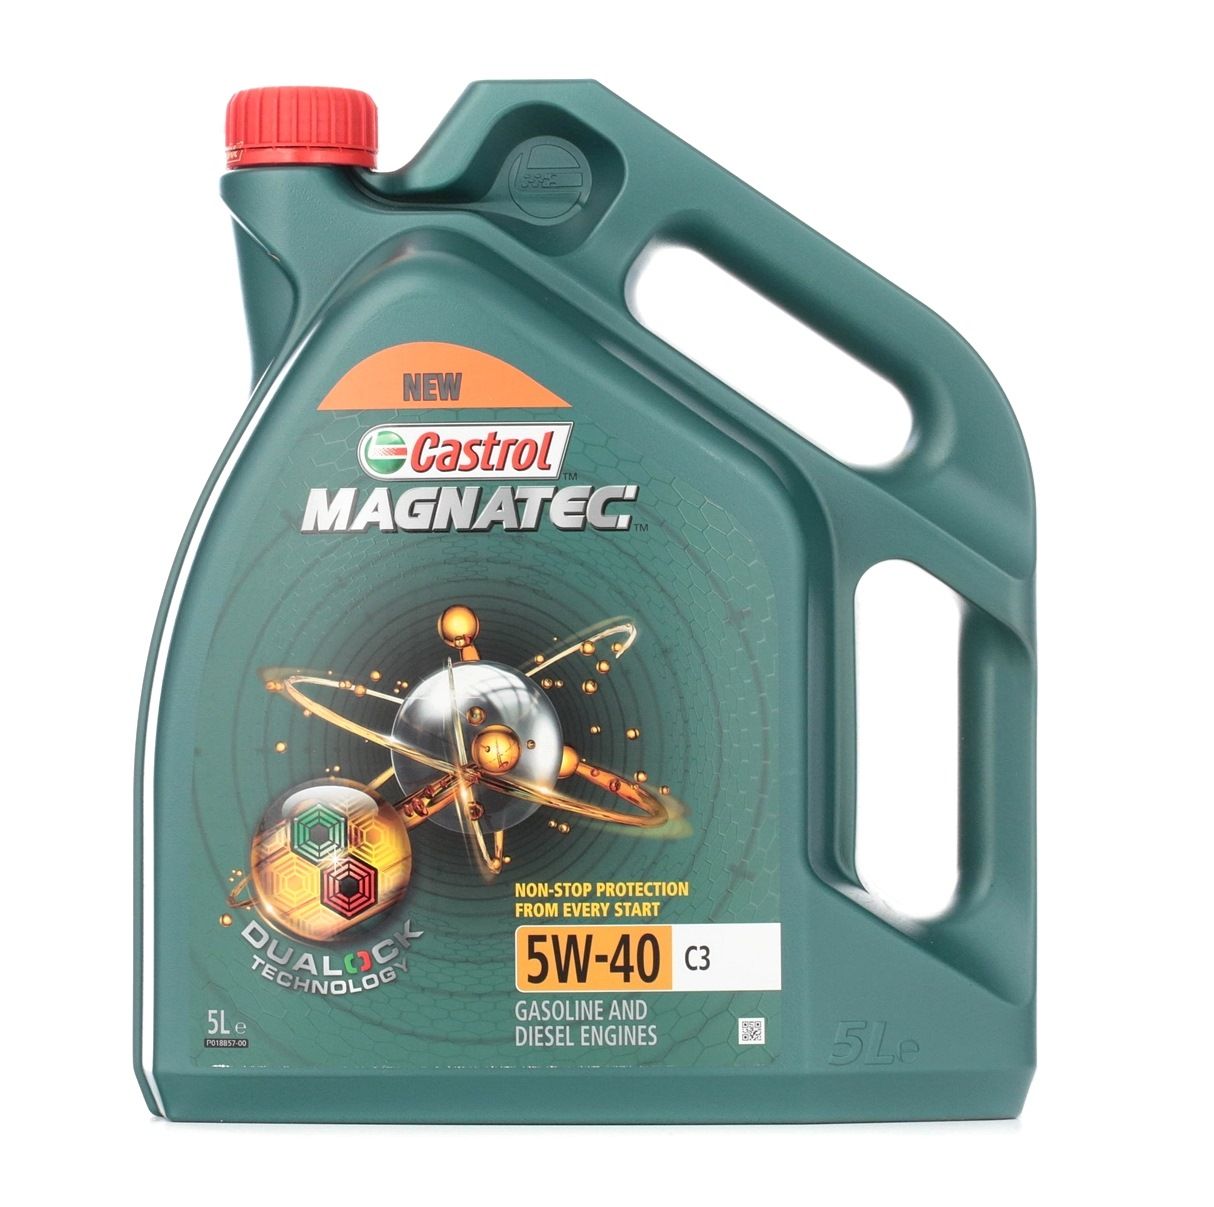 Peugeot Engine oil CASTROL 5W-40 at a good price